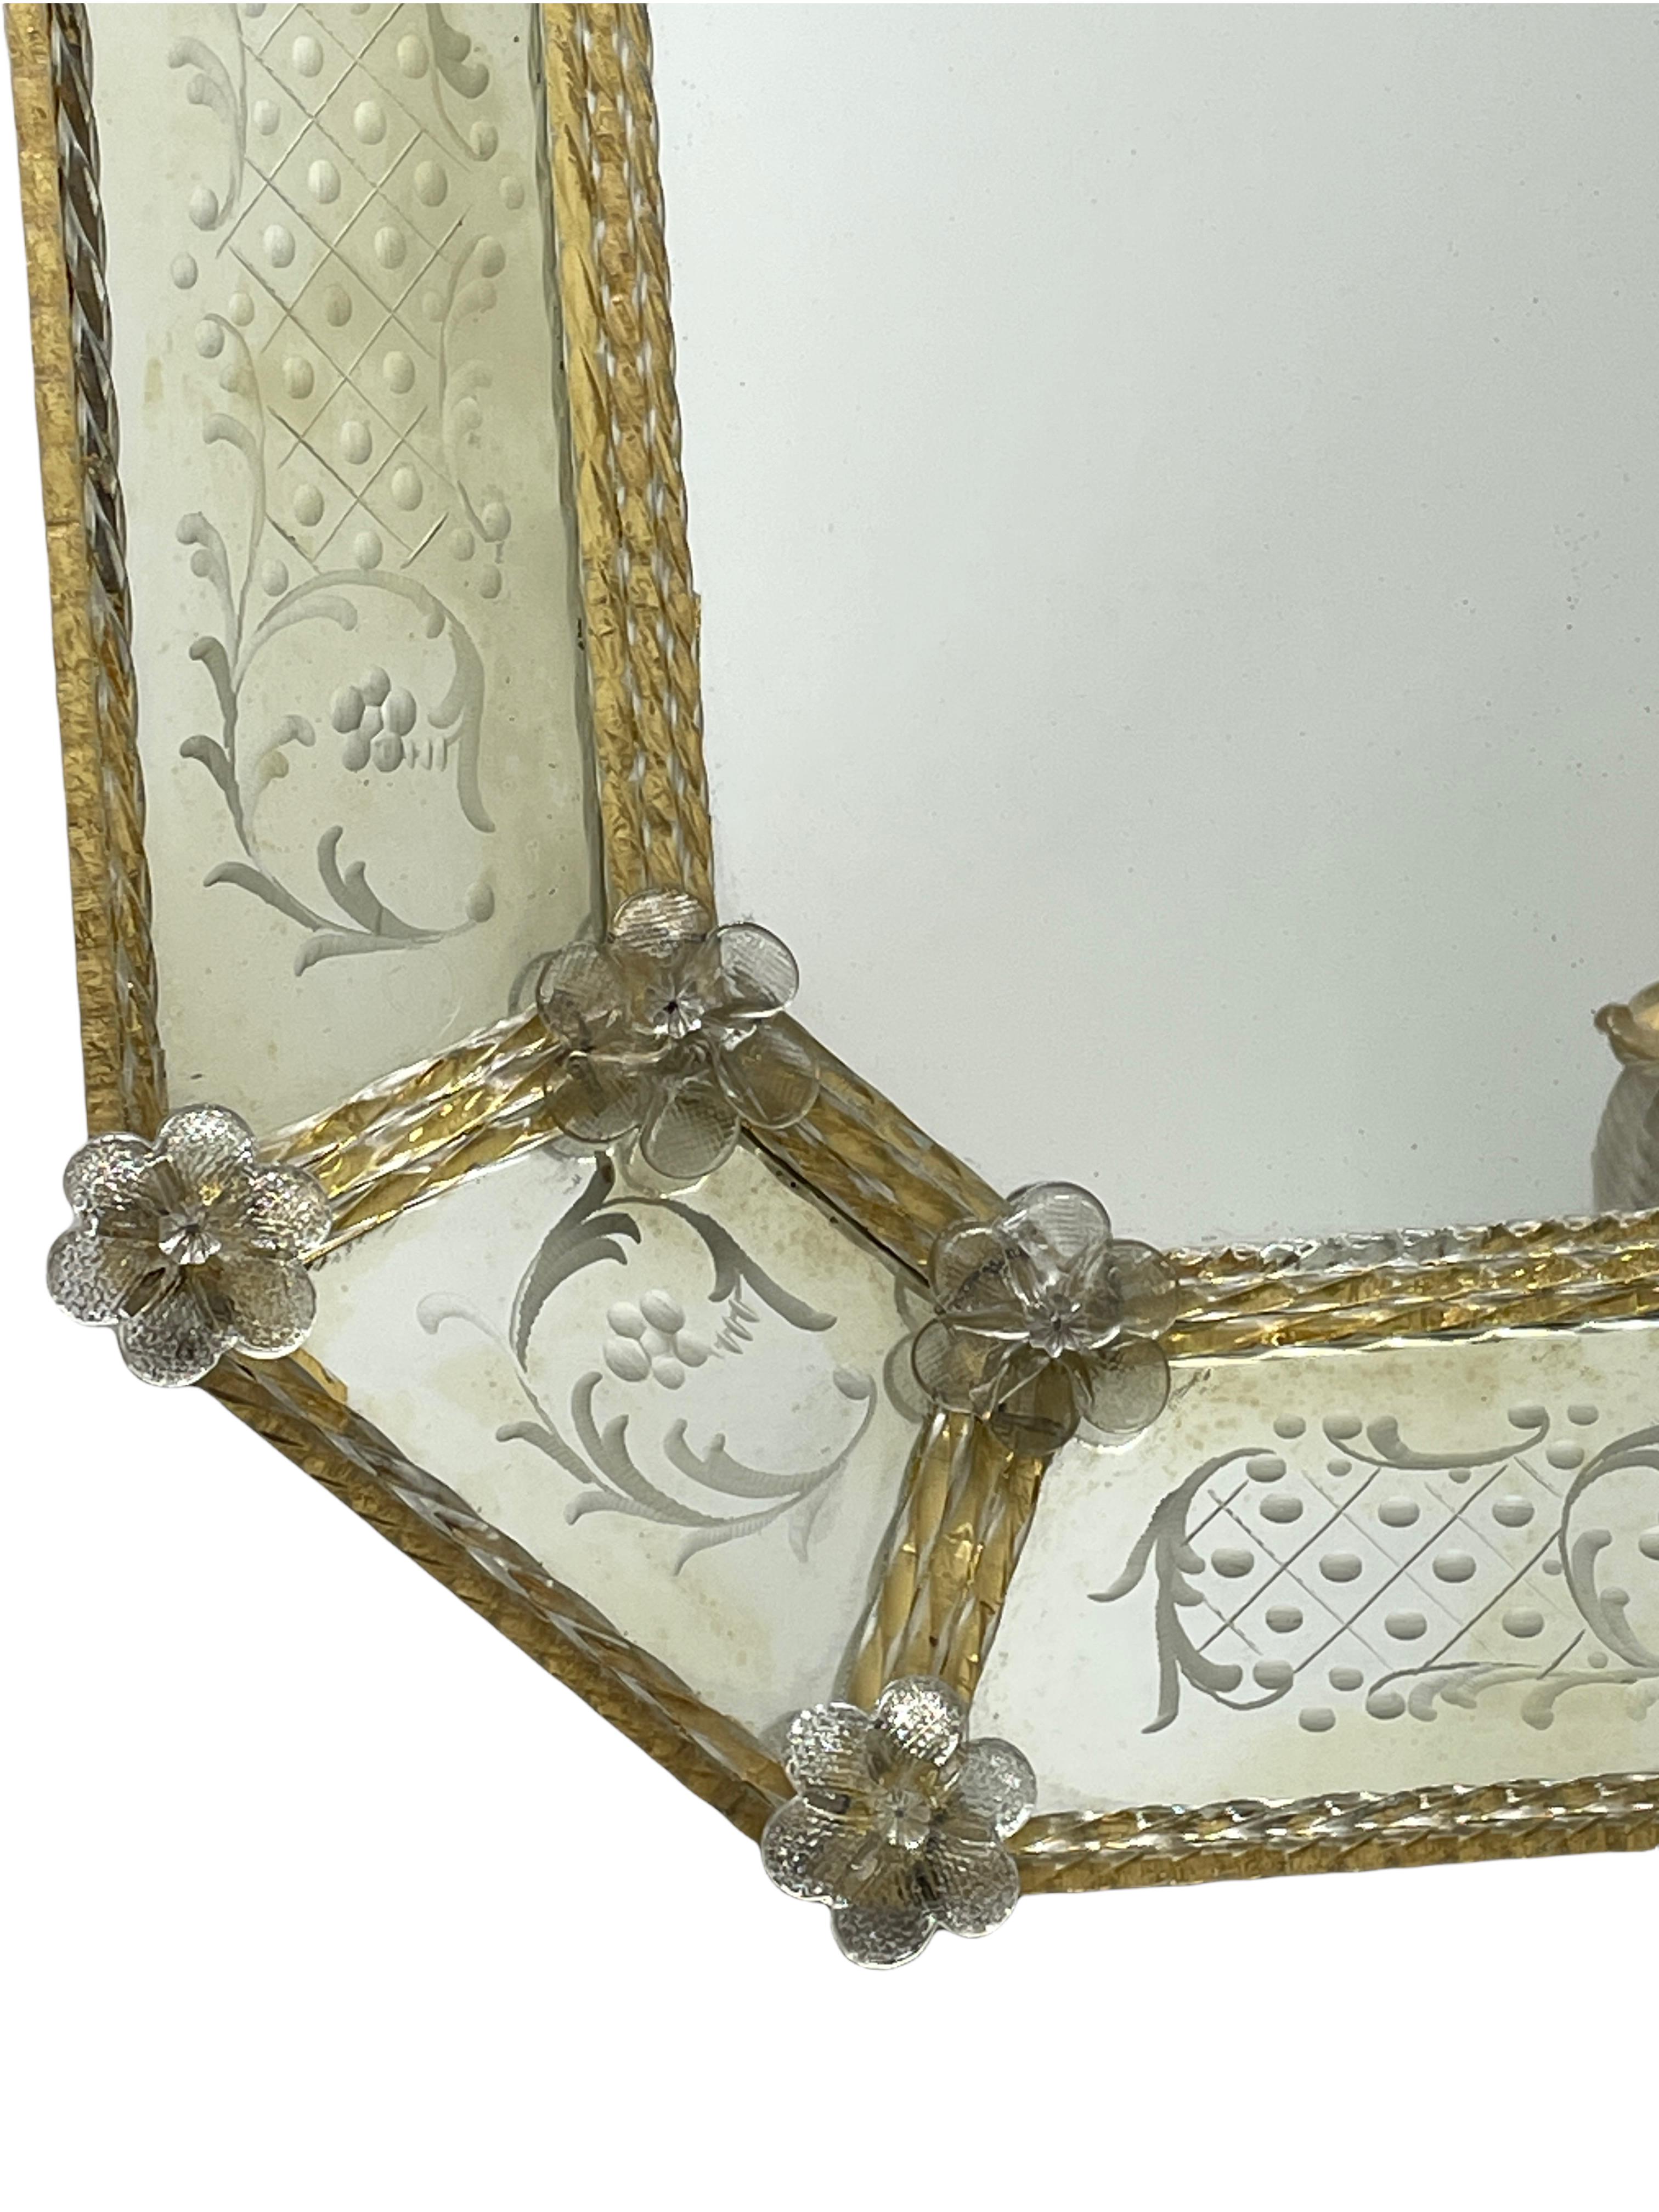 A stunning beautiful Murano glass mirror surrounded with handmade gold flake glass flowers. Age circa 1930s or older. With signs of wear as expected with age and use. The mirror fields at the edge are in distressed condition due to age, the inner